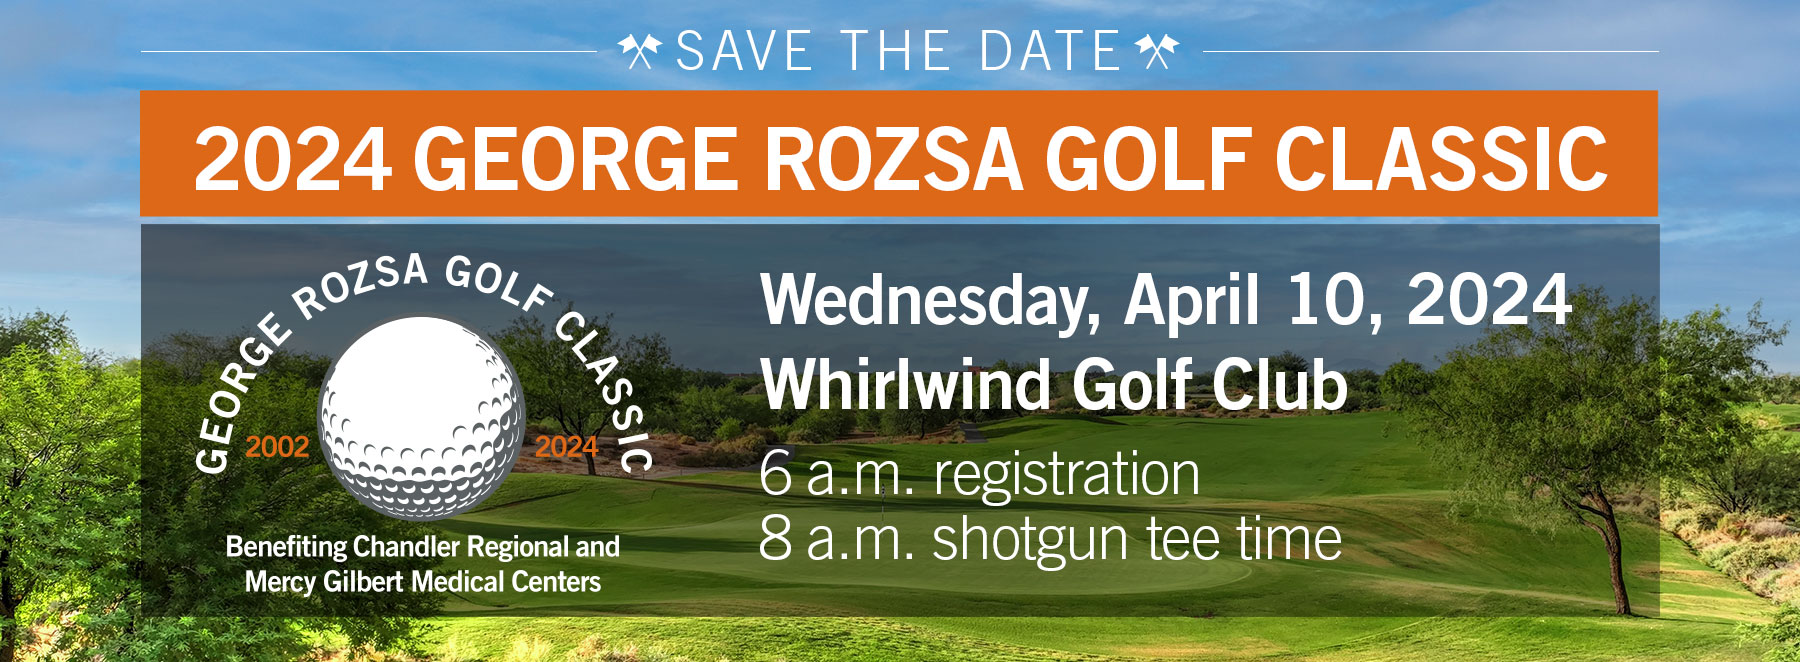 George Rozsa Golf Classic Text Banner 2024